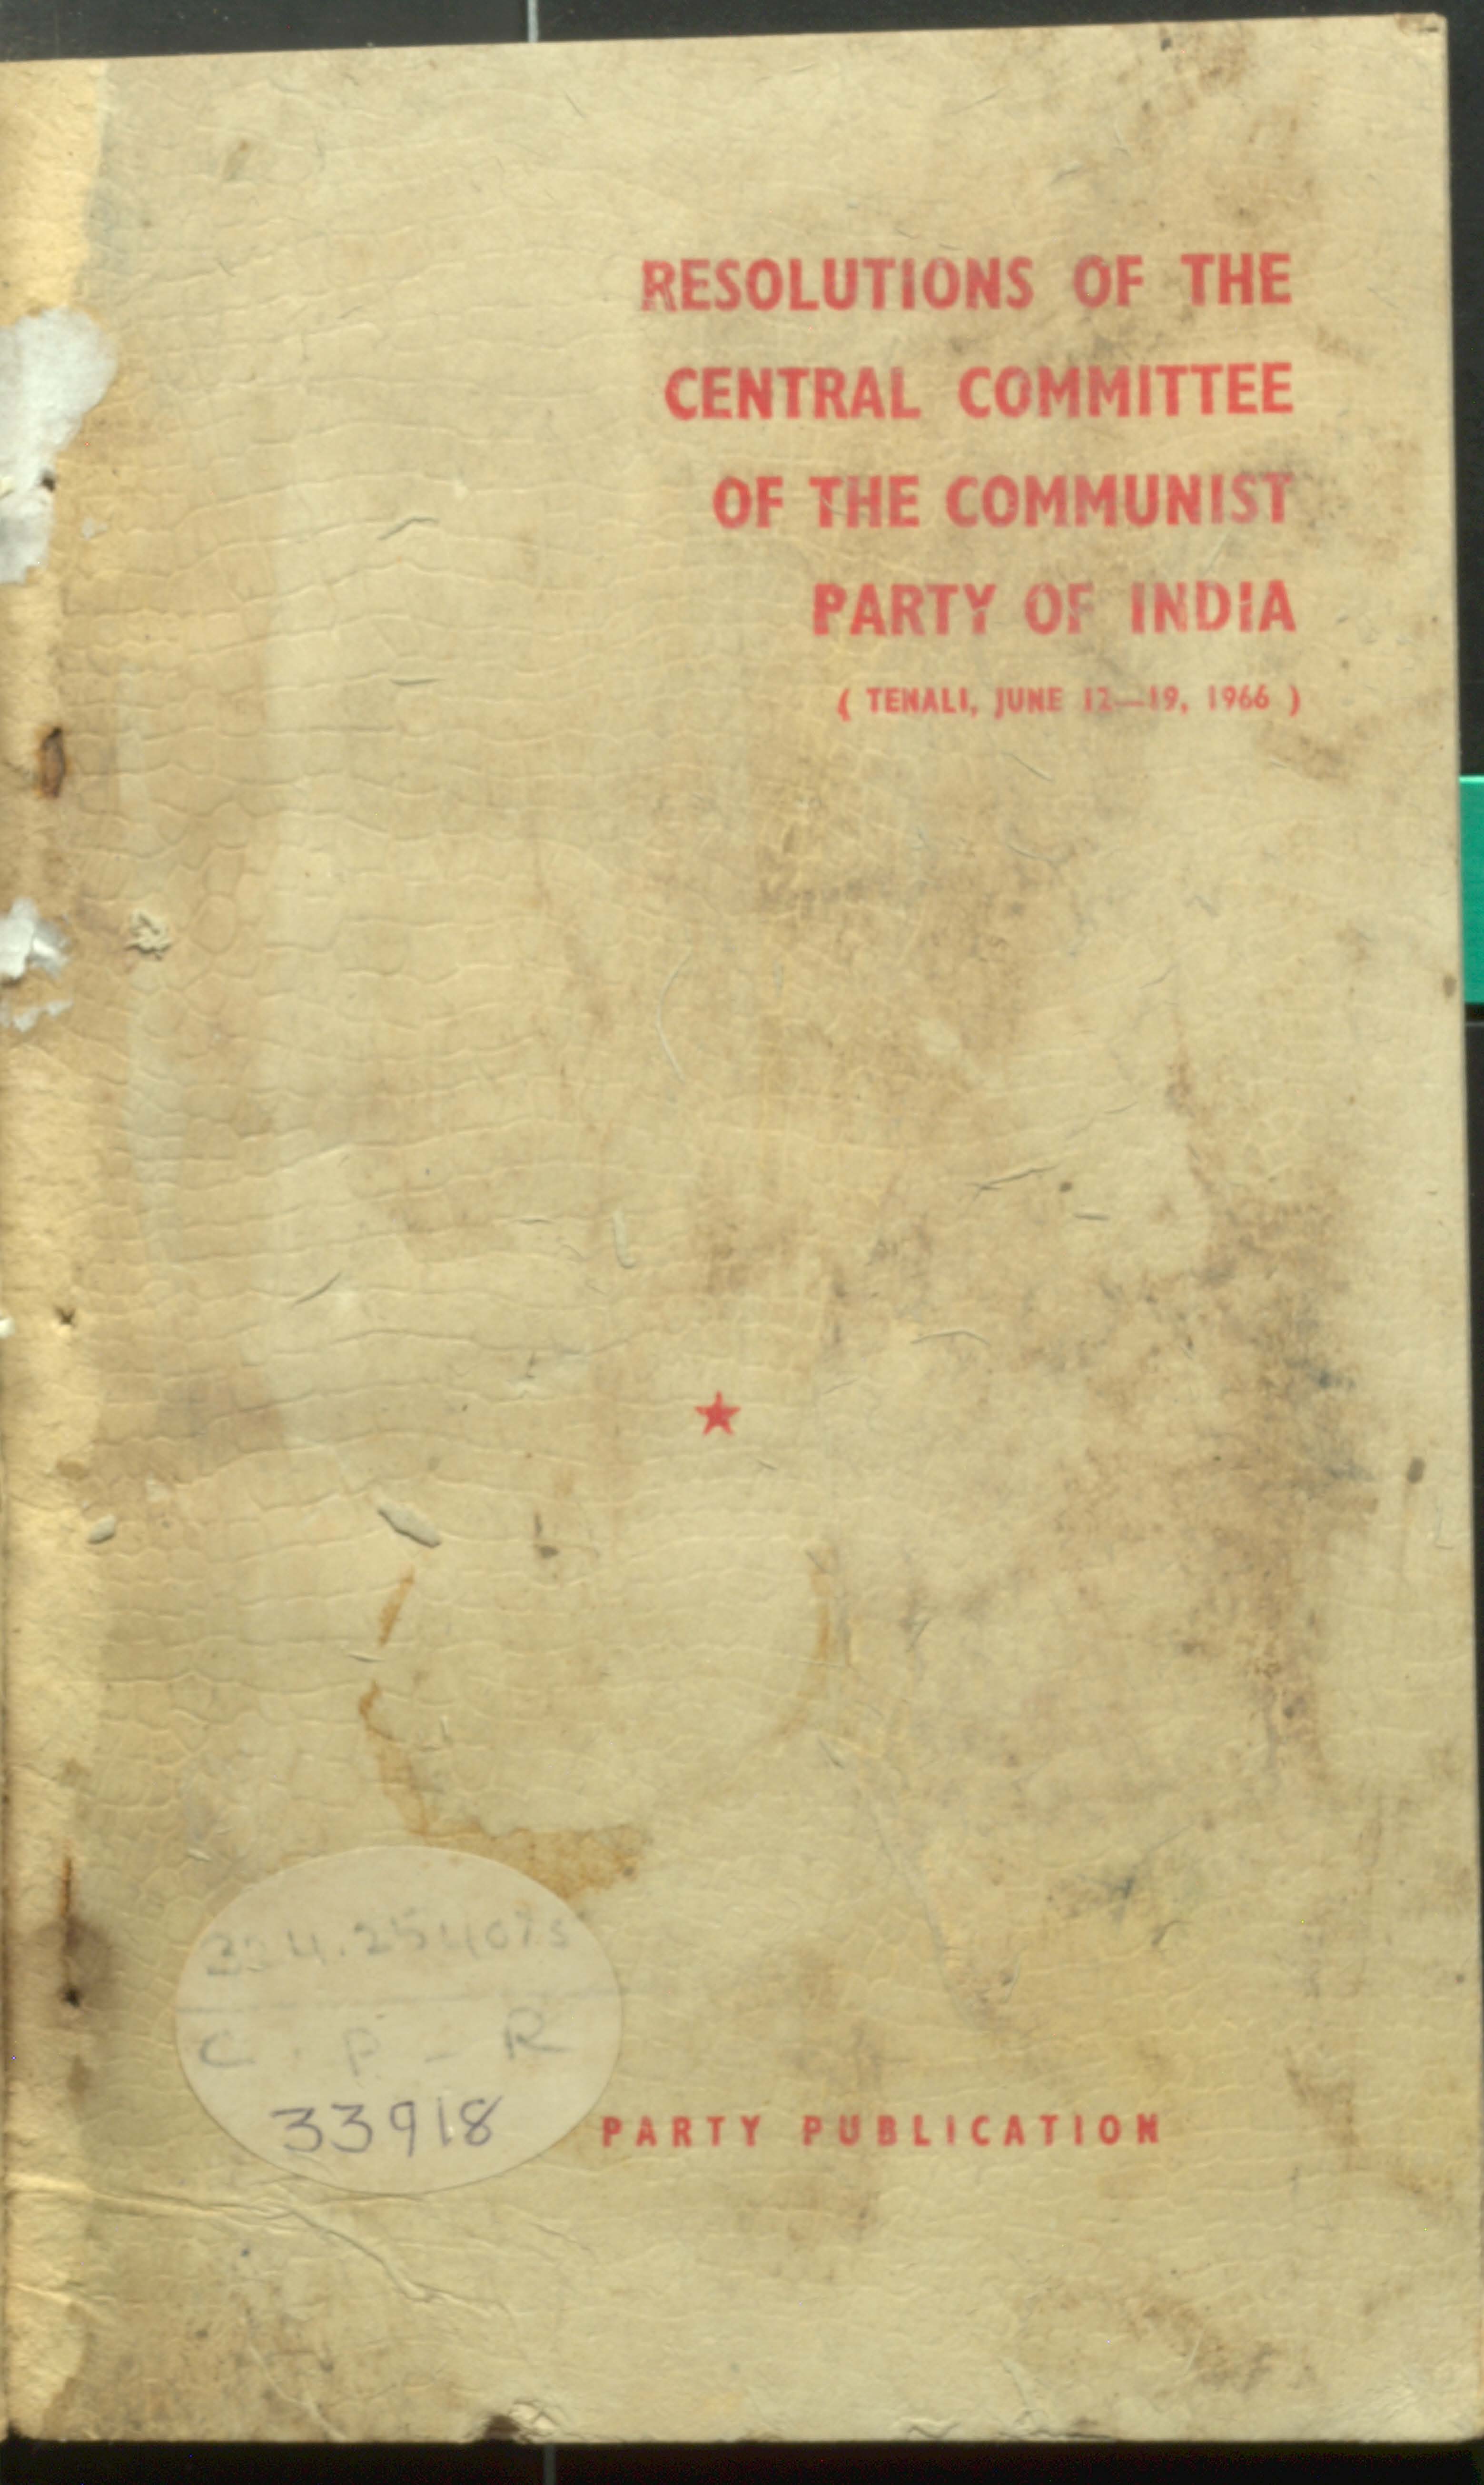 Resolutions Of The Central Committee of the Communist Party Of India (Tenalli,june 12-19,1966)